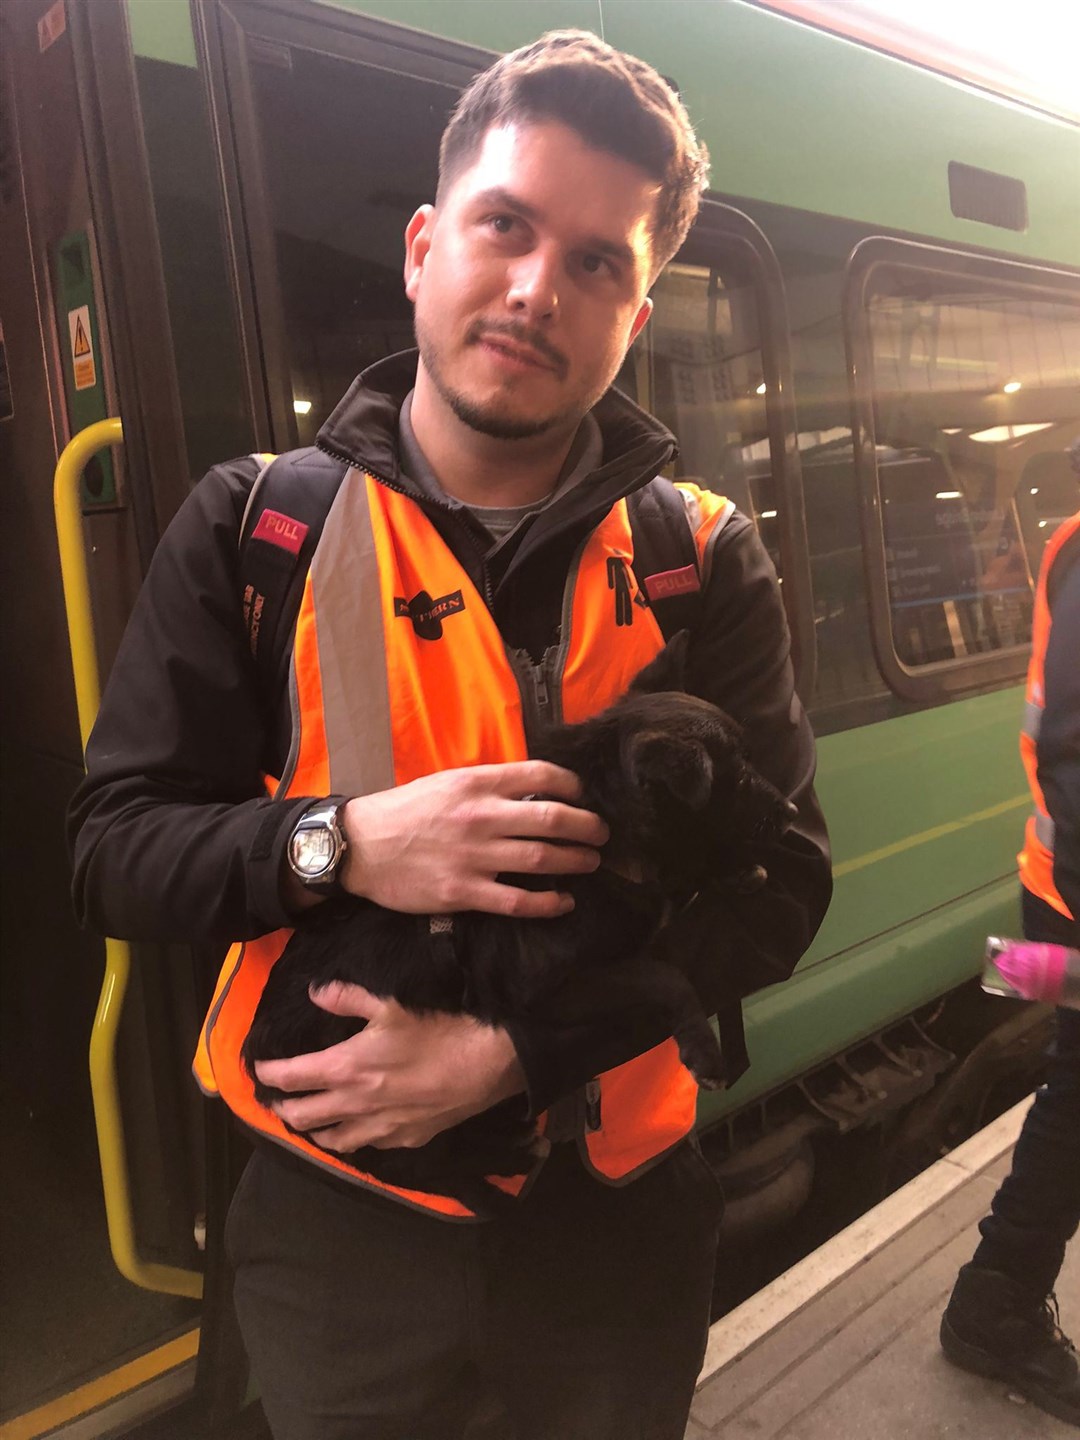 Trainee driver Stefan Hug saved a puppy found on an active train line in London (Rosalind McKenzie/PA)